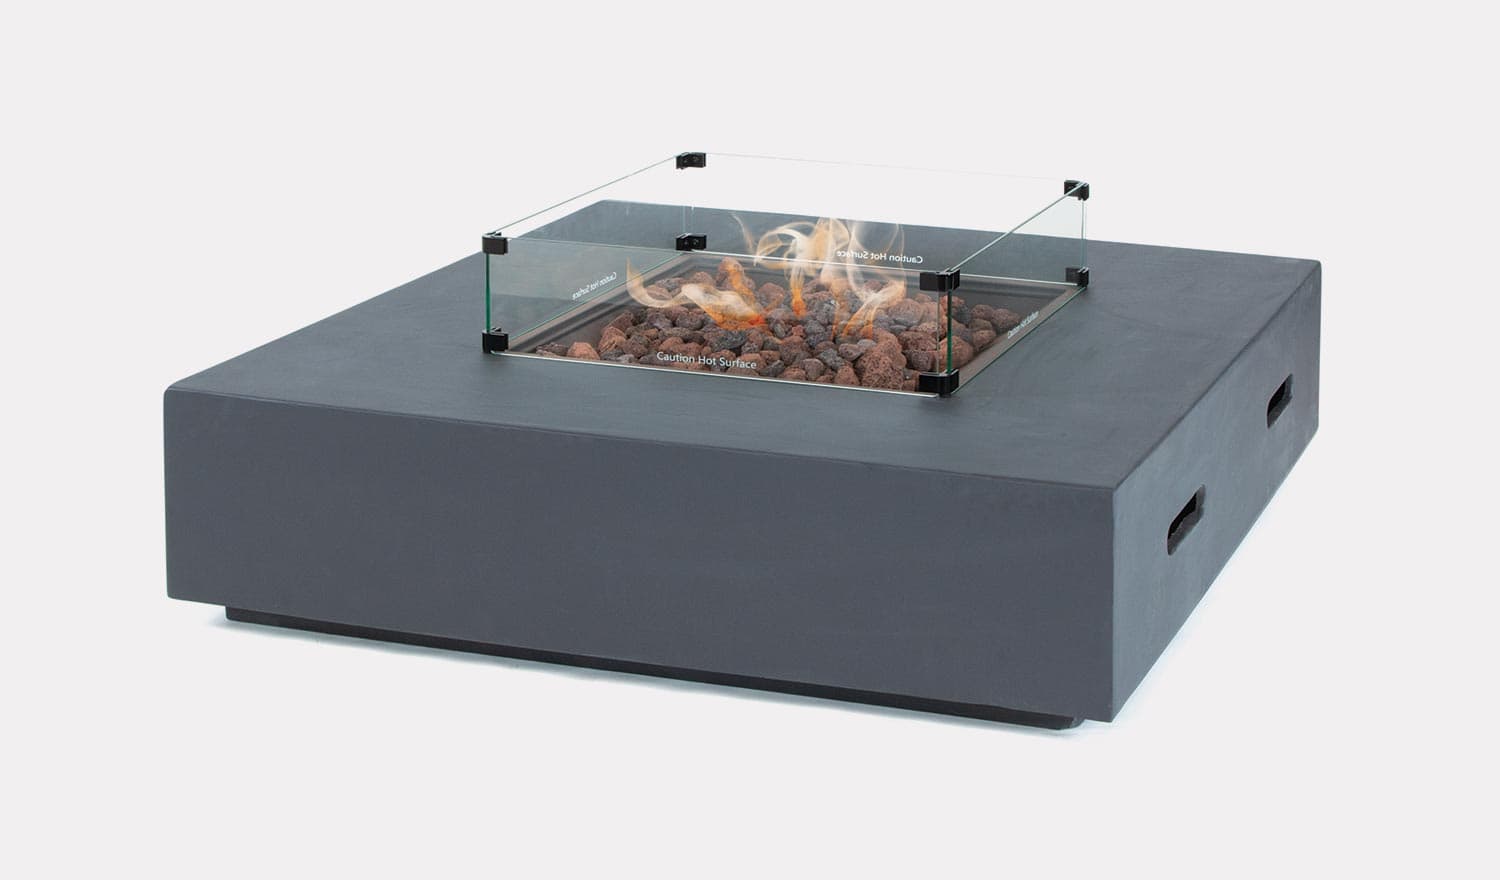 Universal Fire Pit Coffee Table 105cm, Electric Fire Pit Table